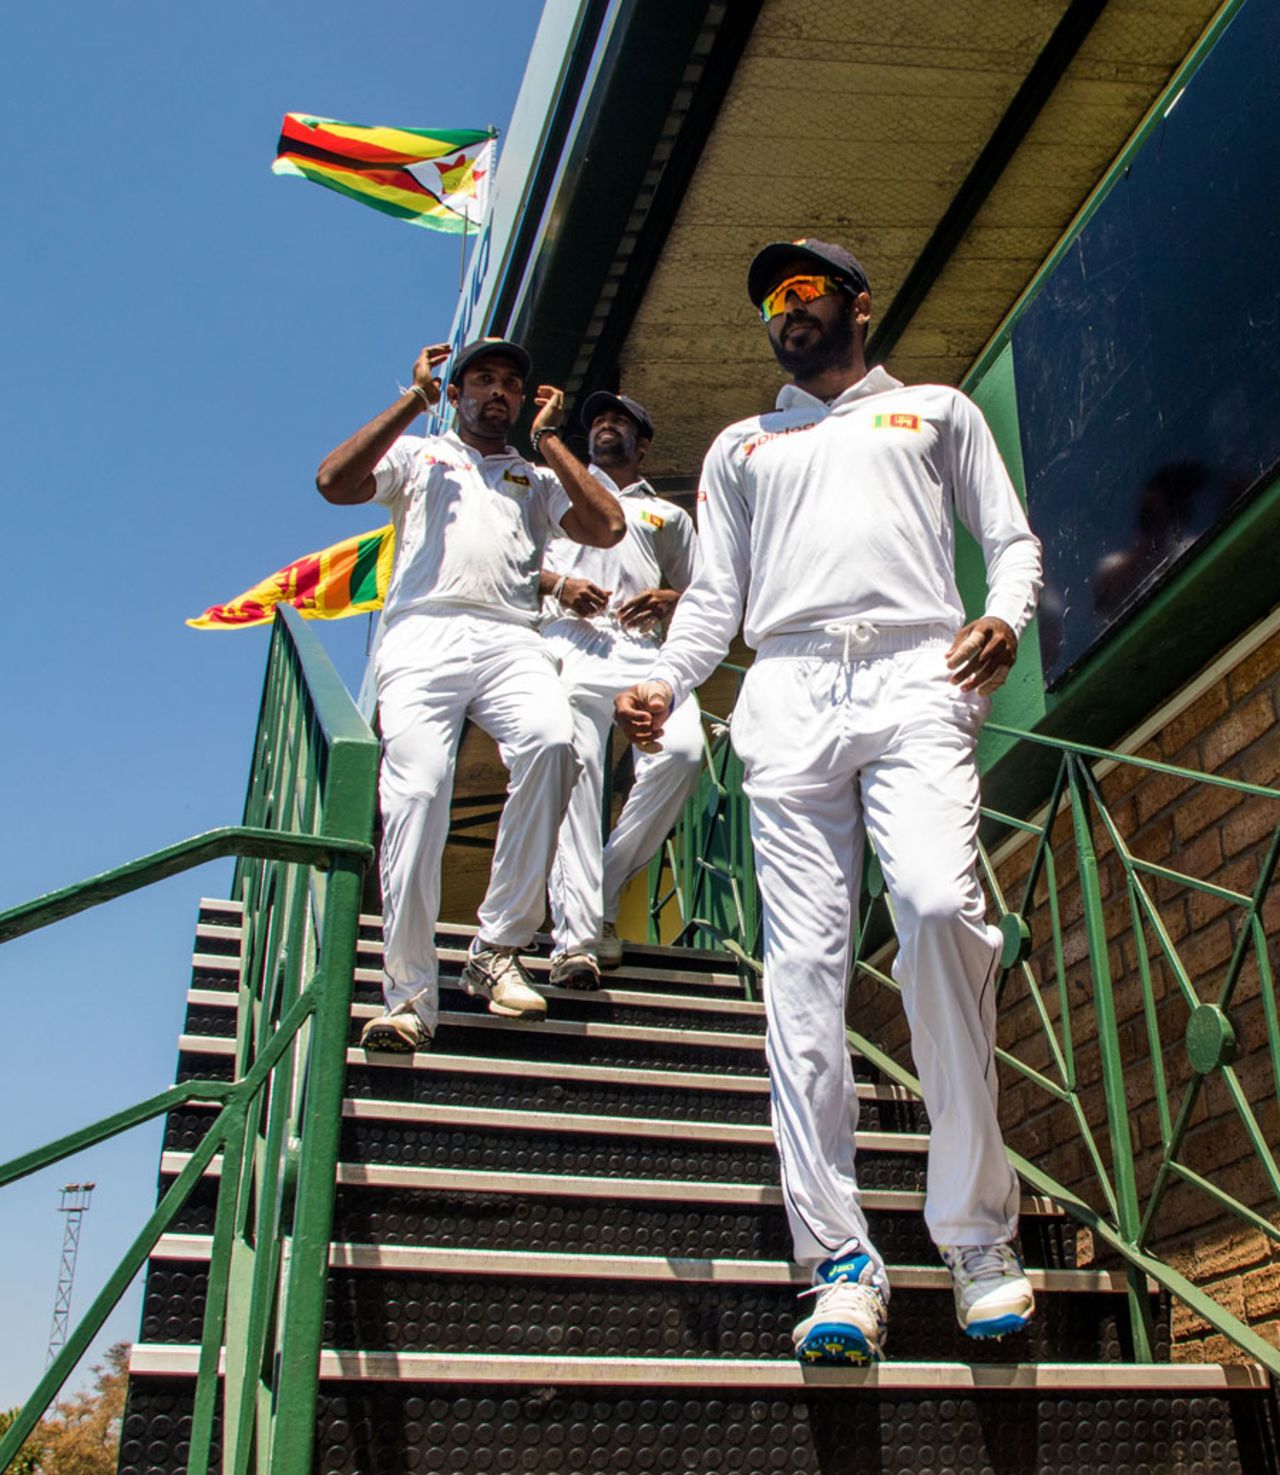 Sri Lanka players head out of the dressing room on the third morning, Zimbabwe v Sri Lanka, 1st Test, Harare, 3rd day, October 31, 2016